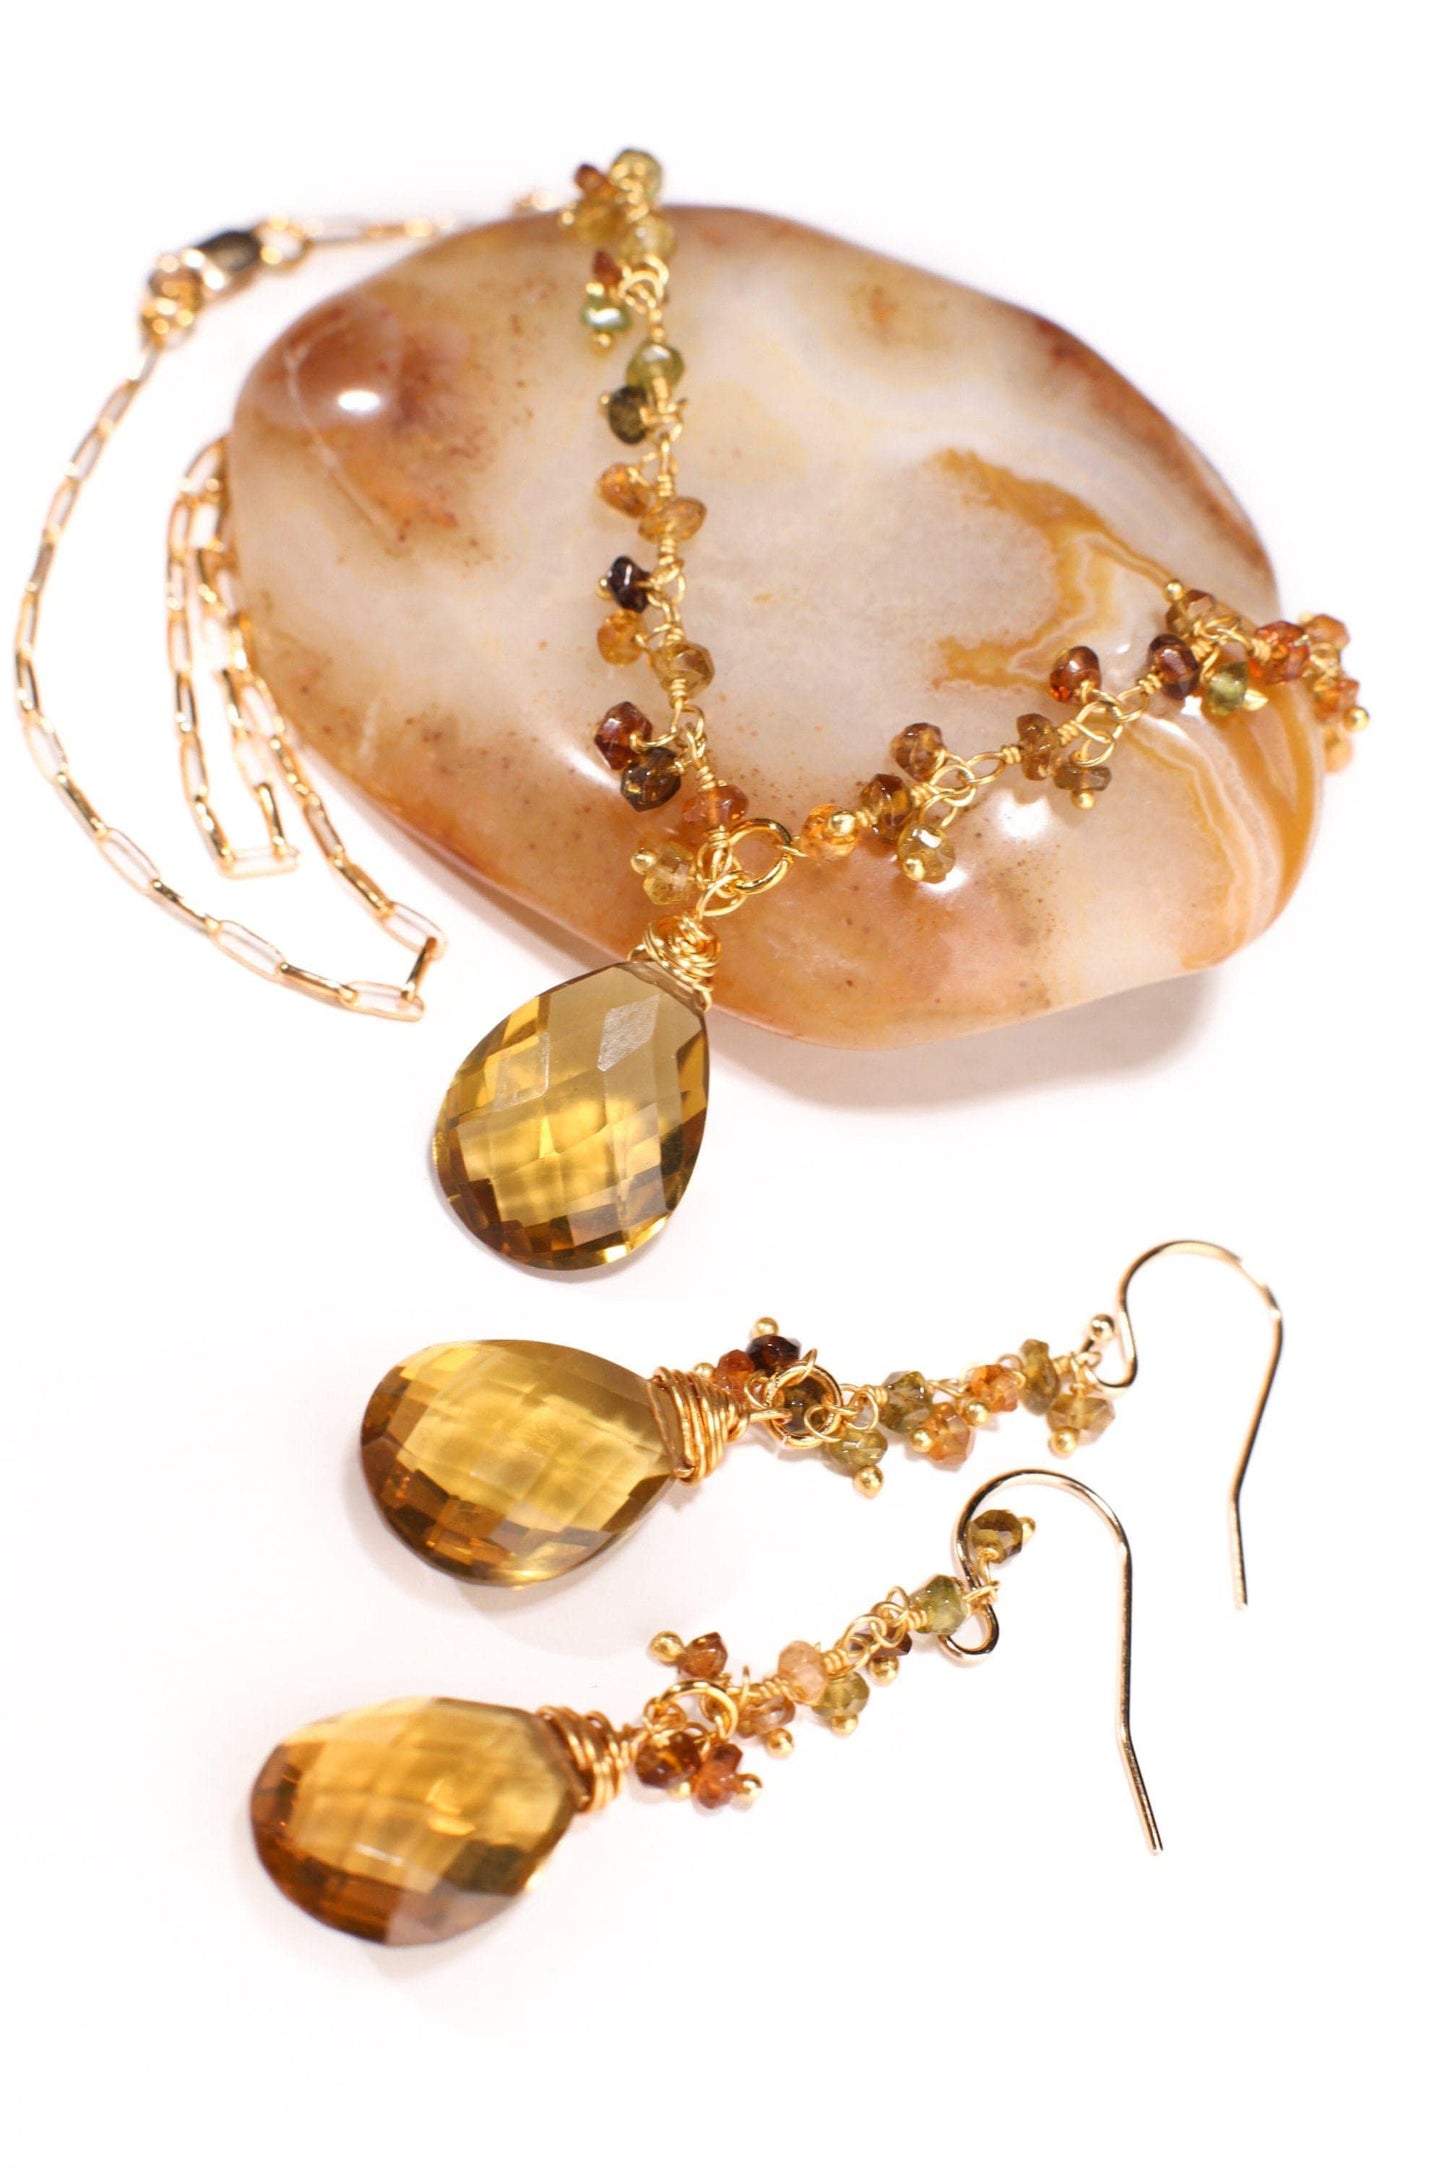 Honey Citrine Teardrop Pendant, Petro Brown Tourmaline Wire Wrapped Necklace, Matching Earrings Jewelry Set in 14k Gold Filled Handmade Gift